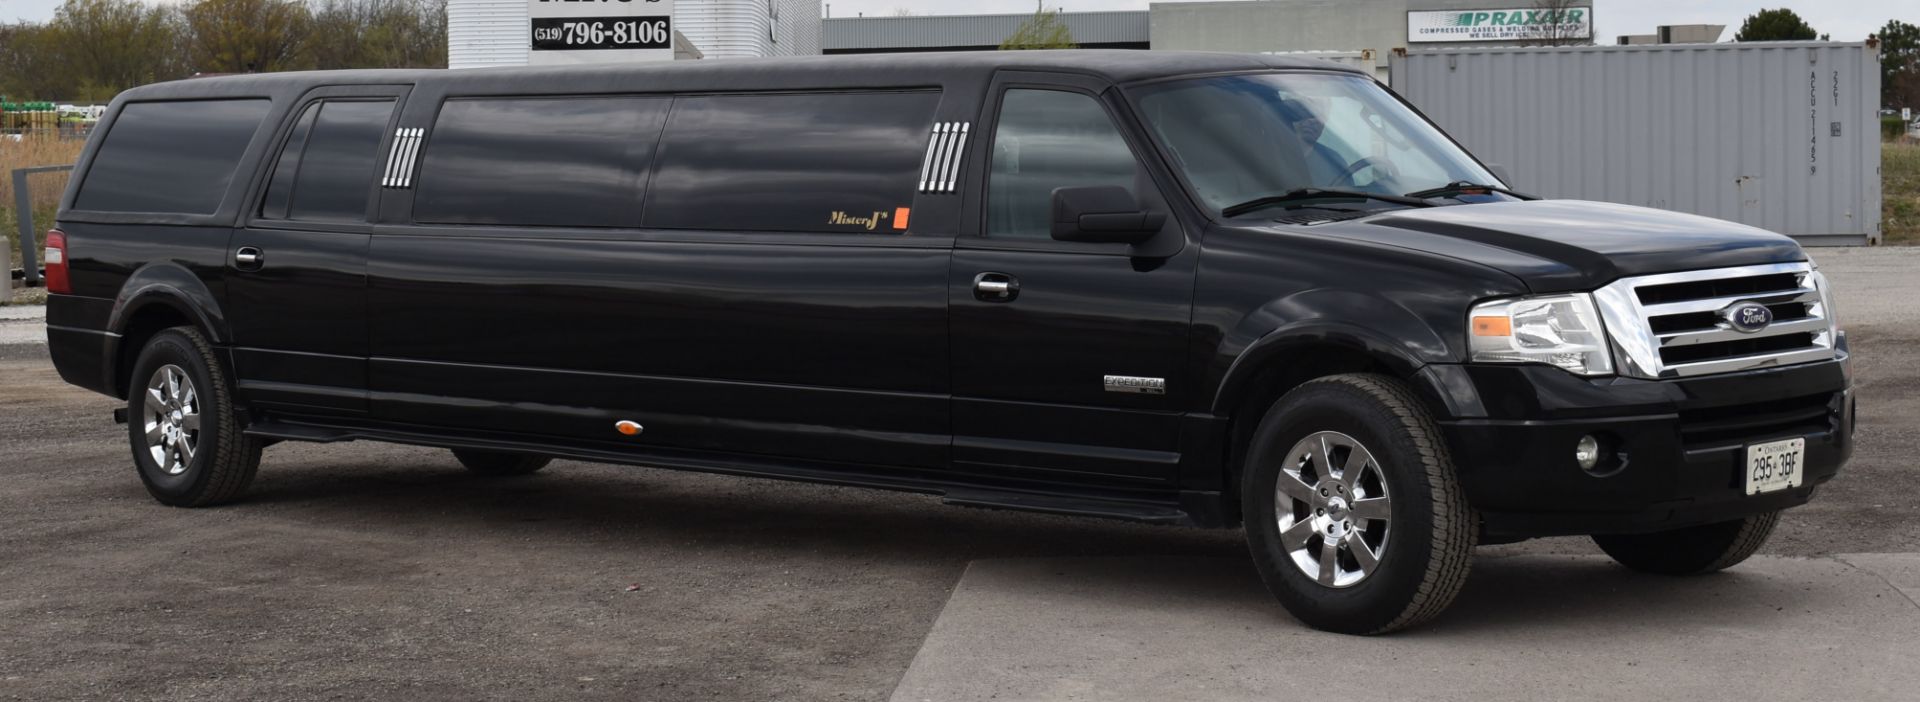 FORD (2008) EXPEDITION 14 PASSENGER STRETCH LIMOUSINE WITH 8 CYLINDER 5.4L GAS ENGINE, 177,845KM ( - Image 3 of 26